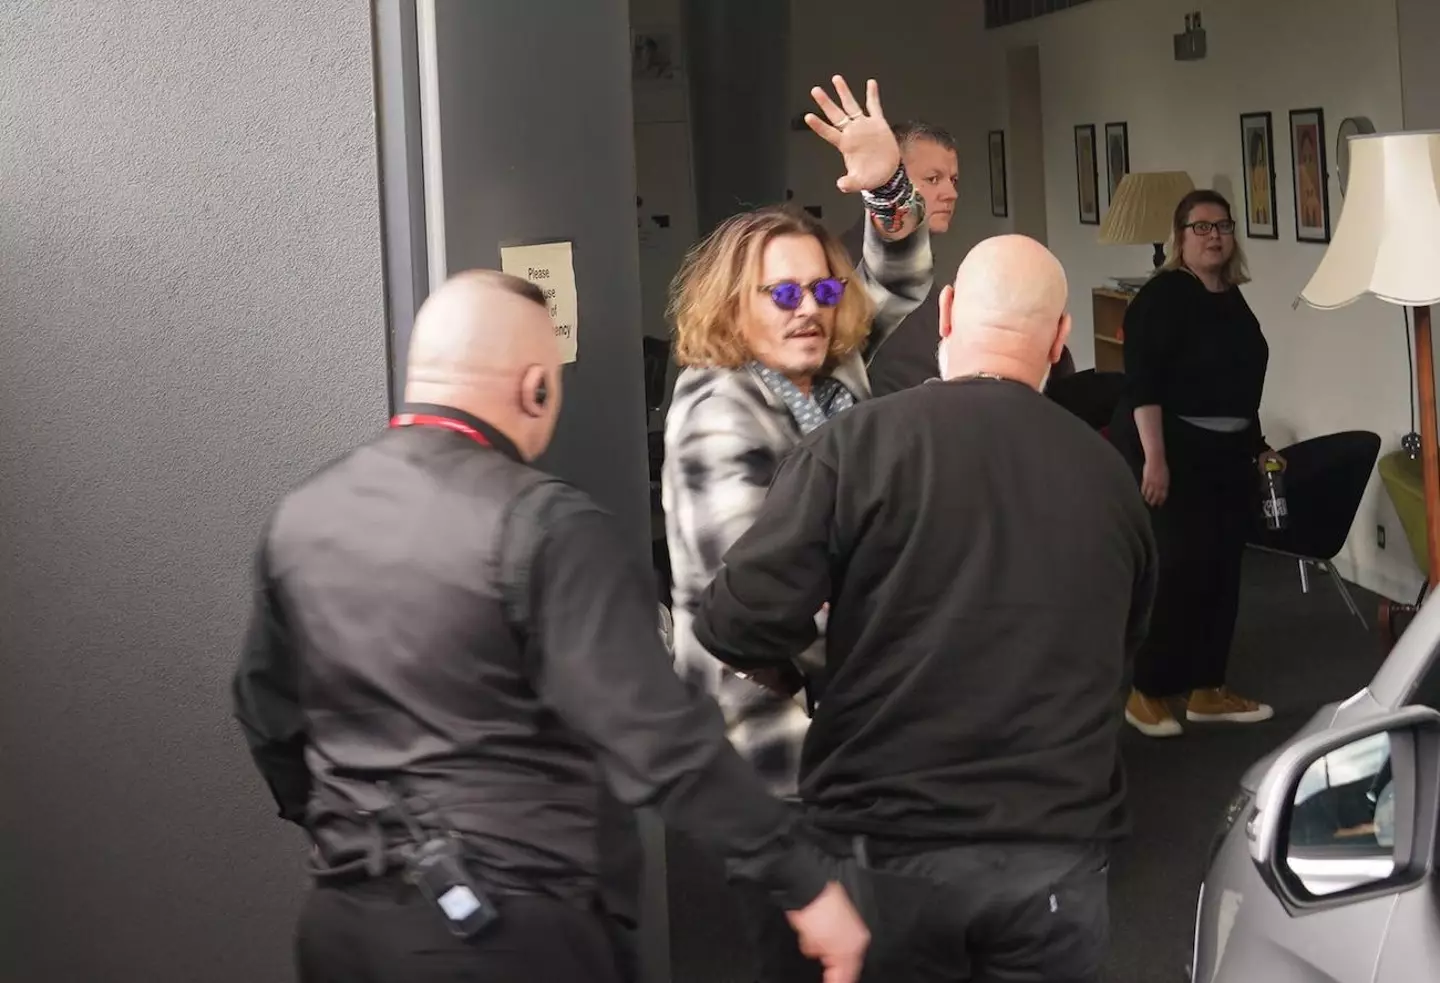 Johnny Depp arriving at Sage Gateshead where he is due to join Jeff Beck on stage on Thursday.